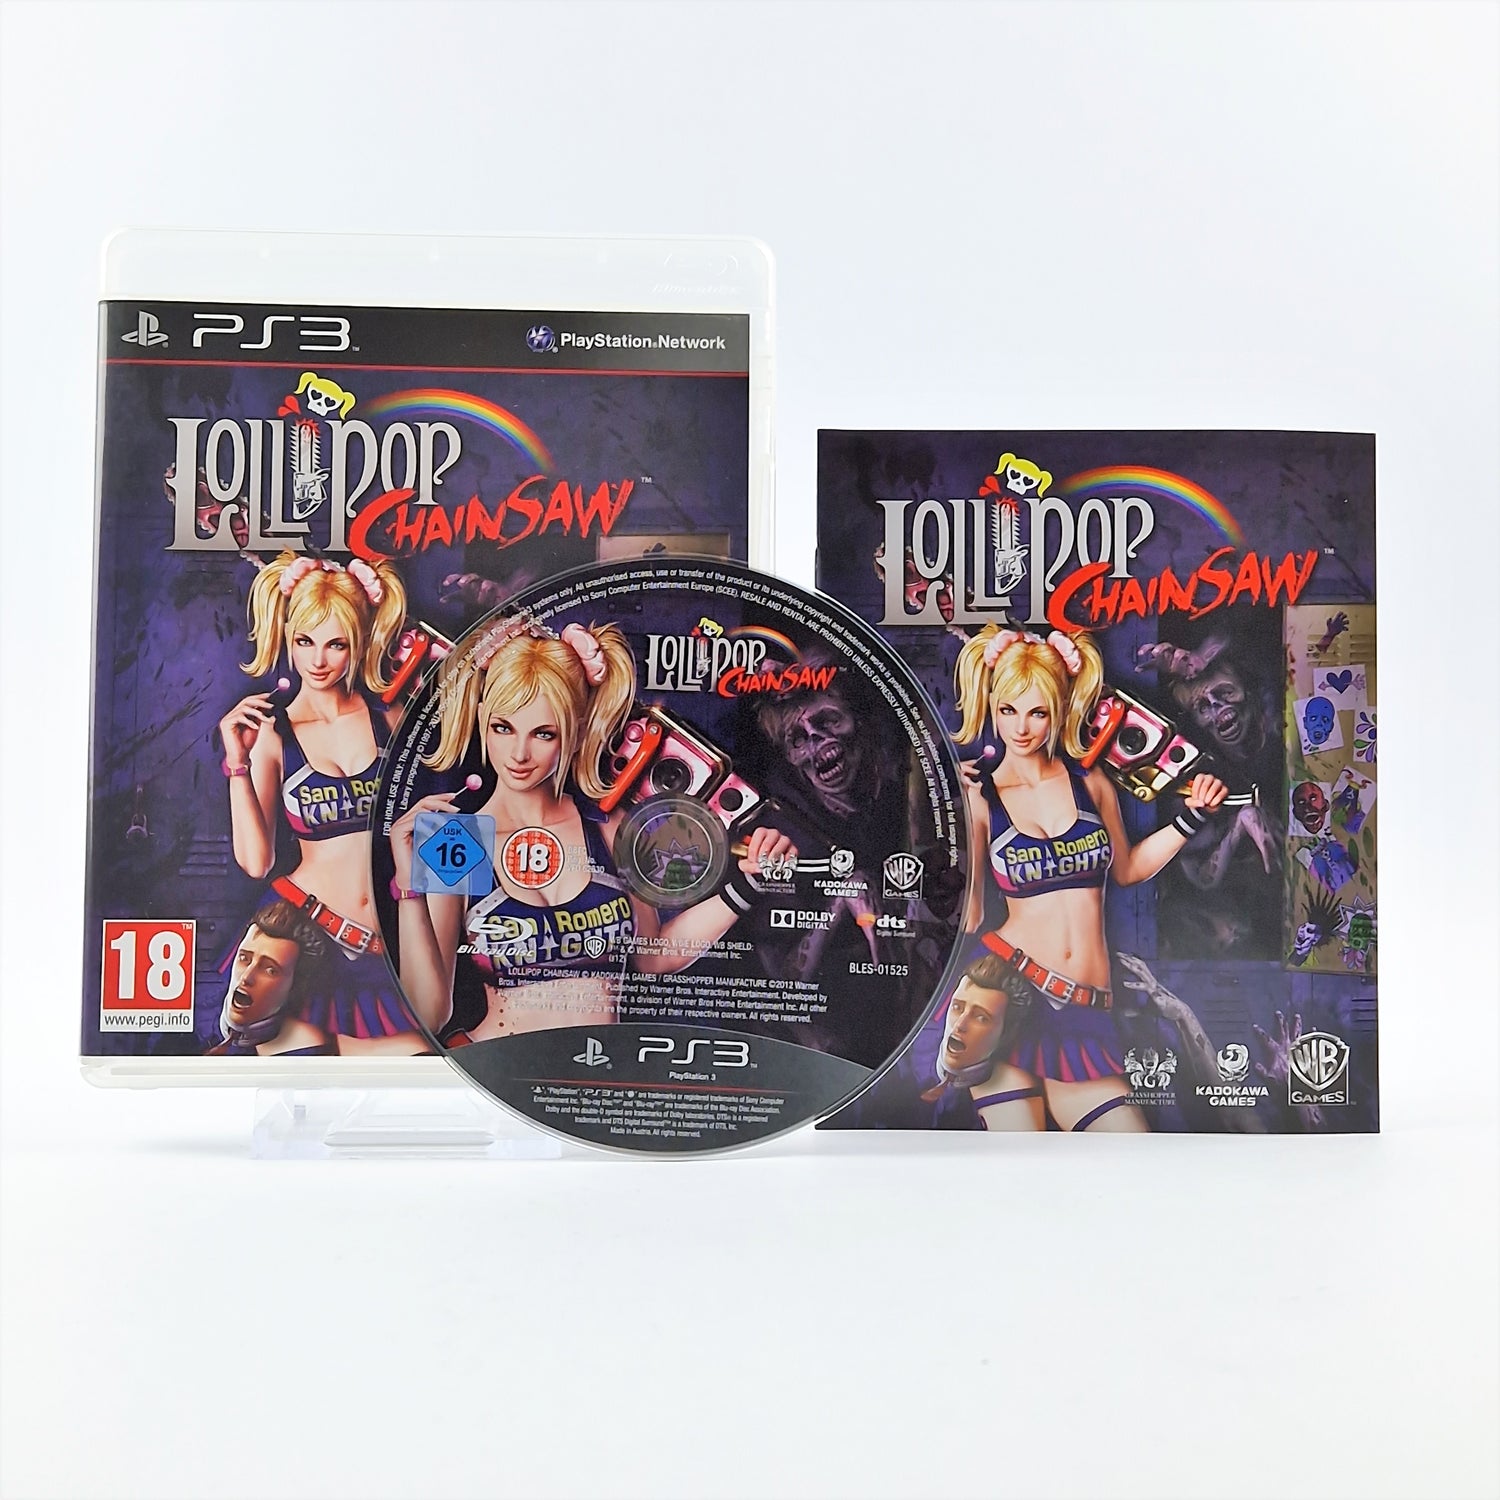 Playstation 3 game: Lollipop Chainsaw - OVP instructions CD - SONY PS3 USK18